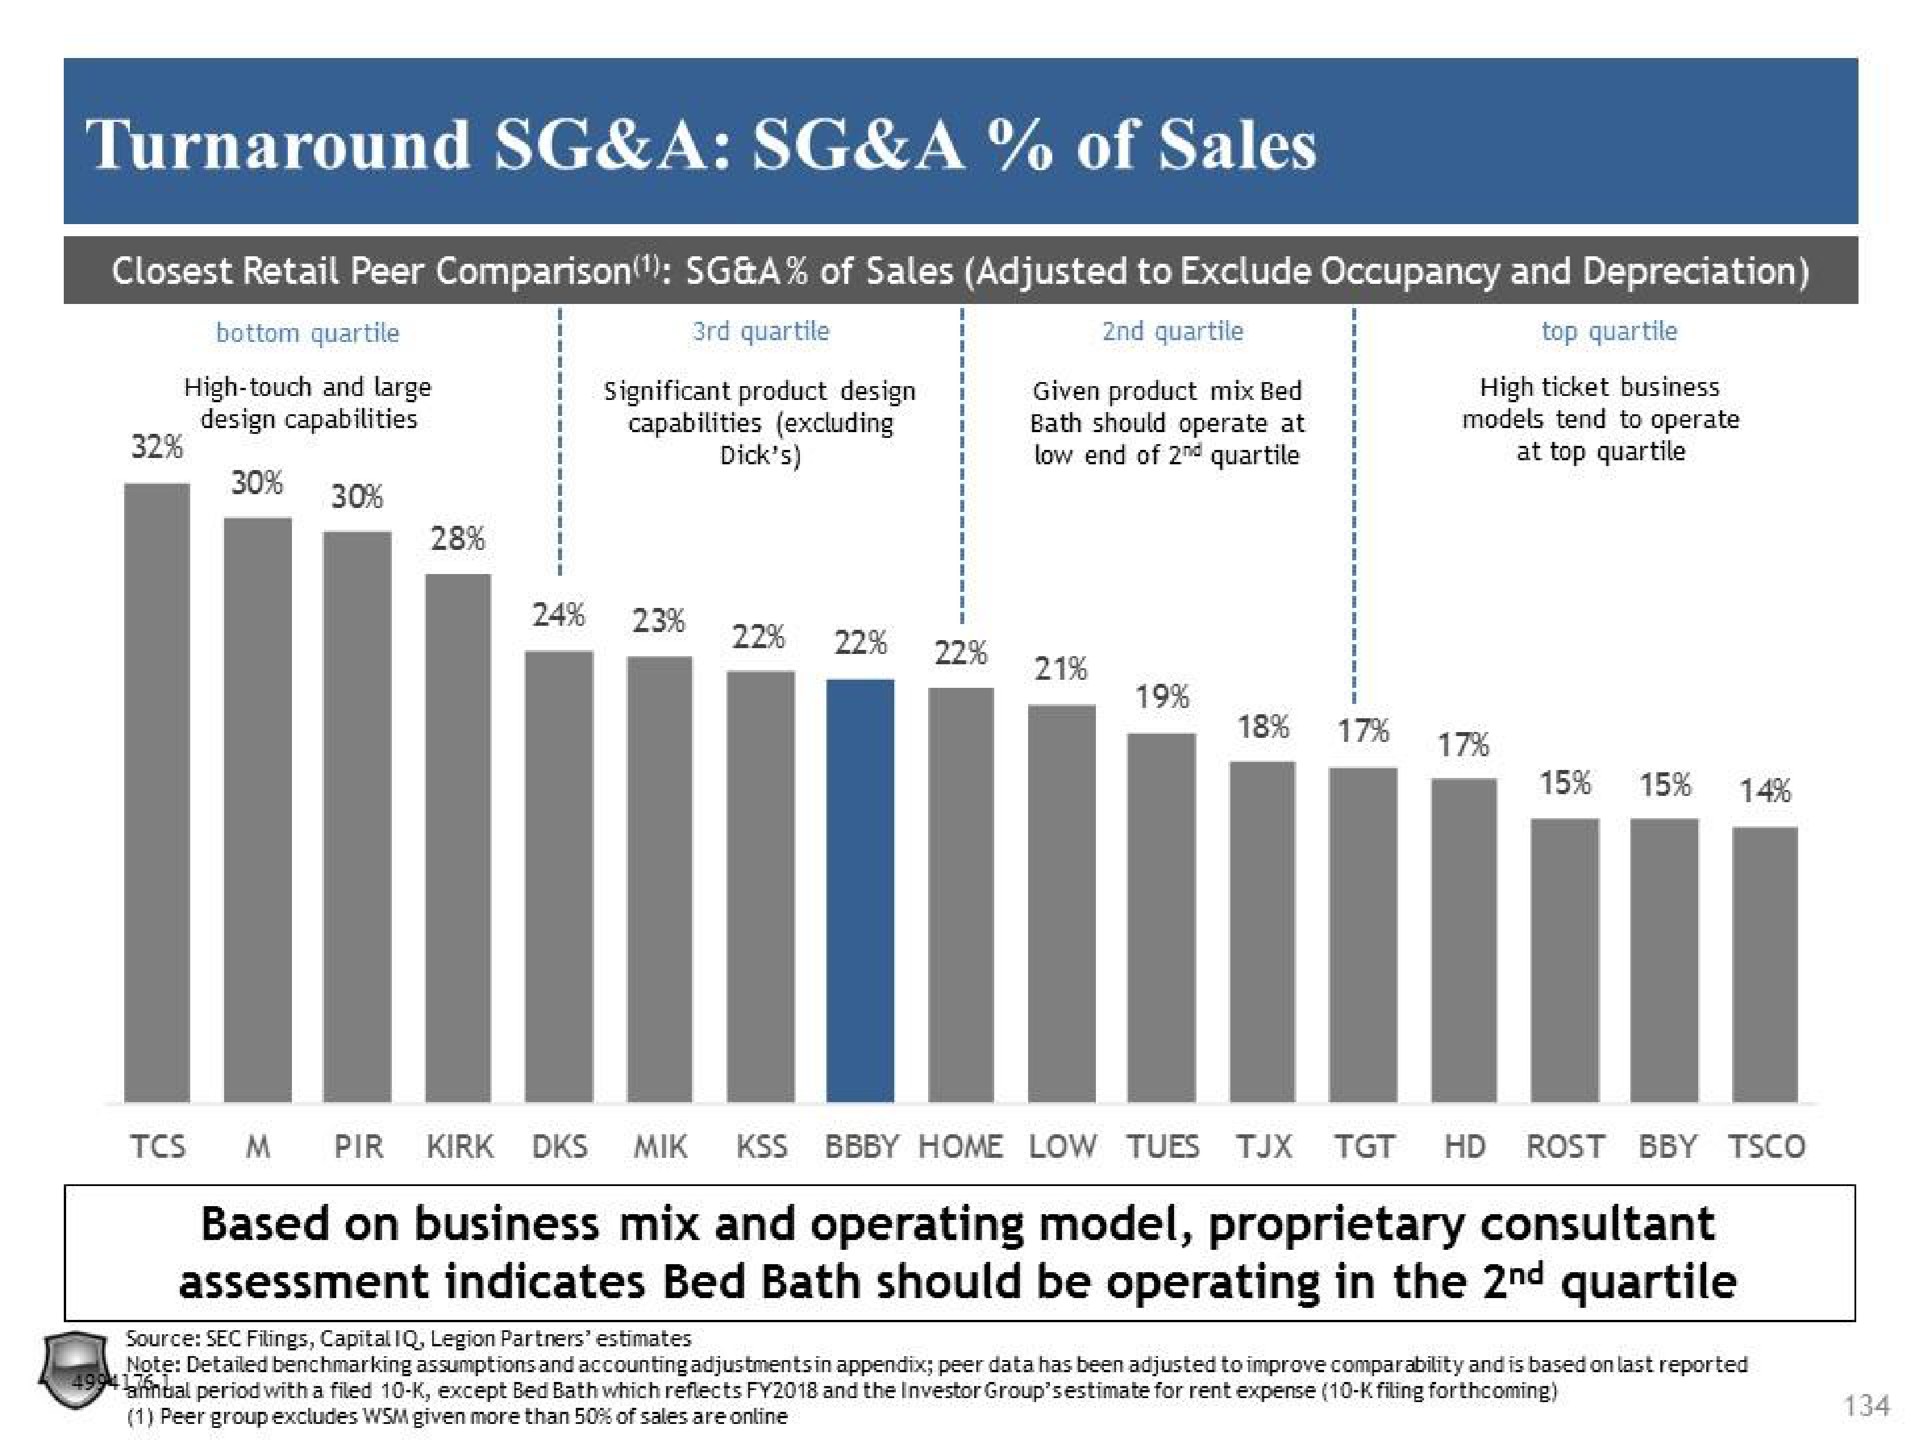 turnaround a a of sales based on business mix and operating model proprietary consultant assessment indicates bed bath should be operating in the quartile | Legion Partners